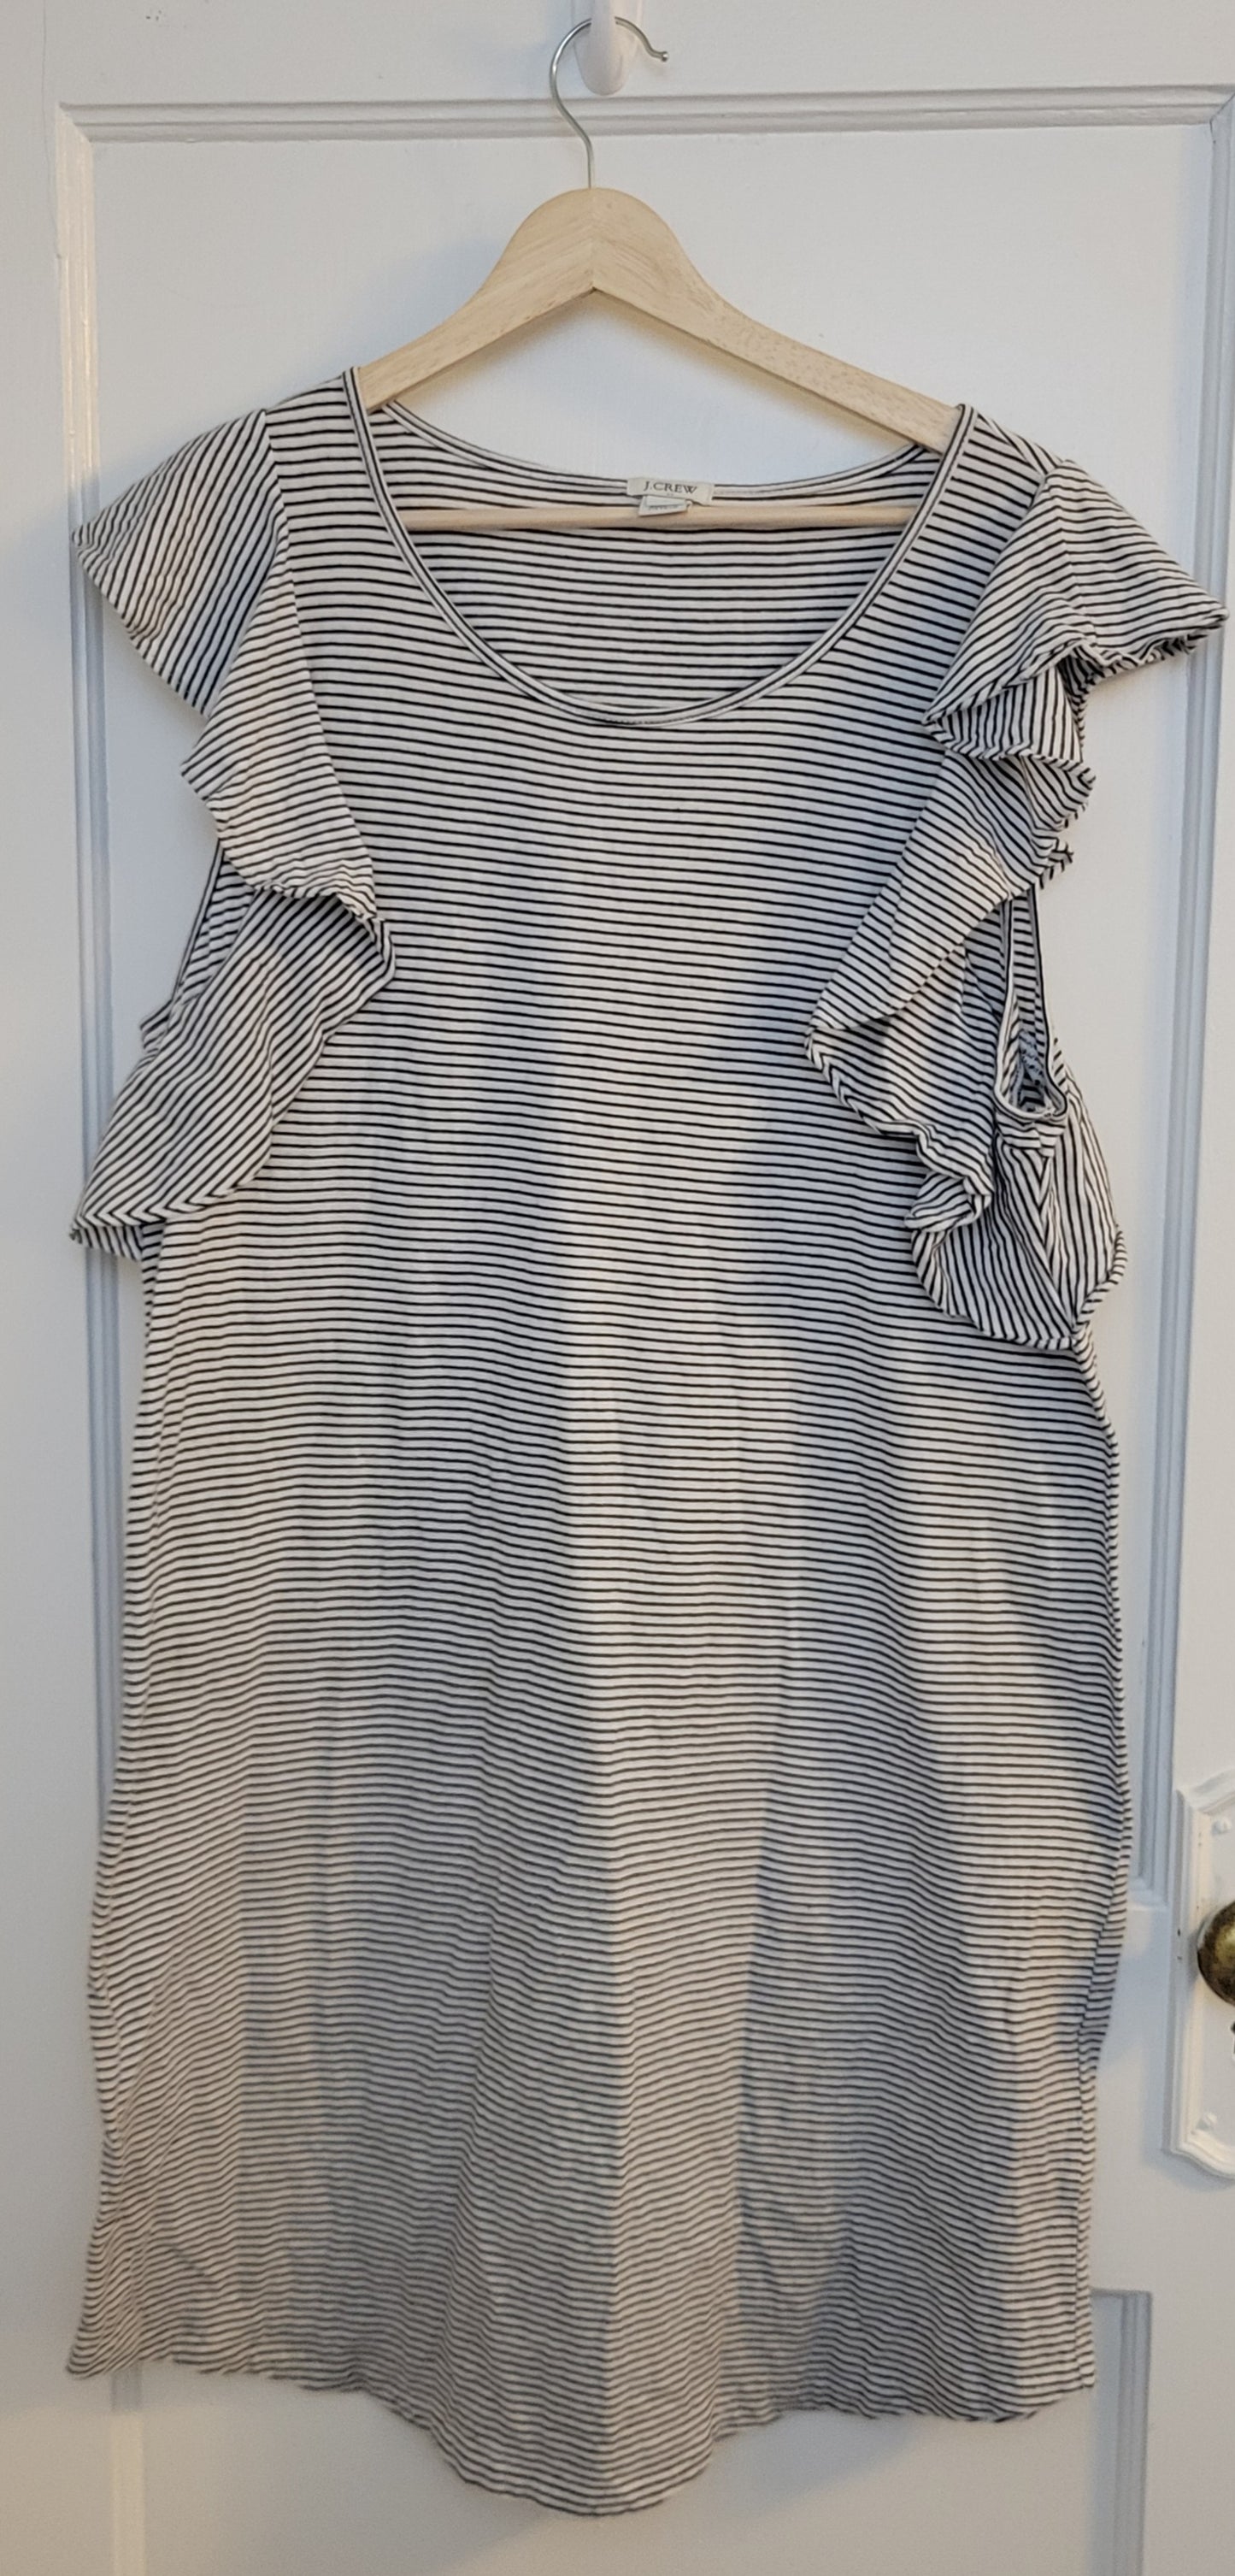 J. Crew Factory Black and White Stripped Jersey Dress, Women's Size L